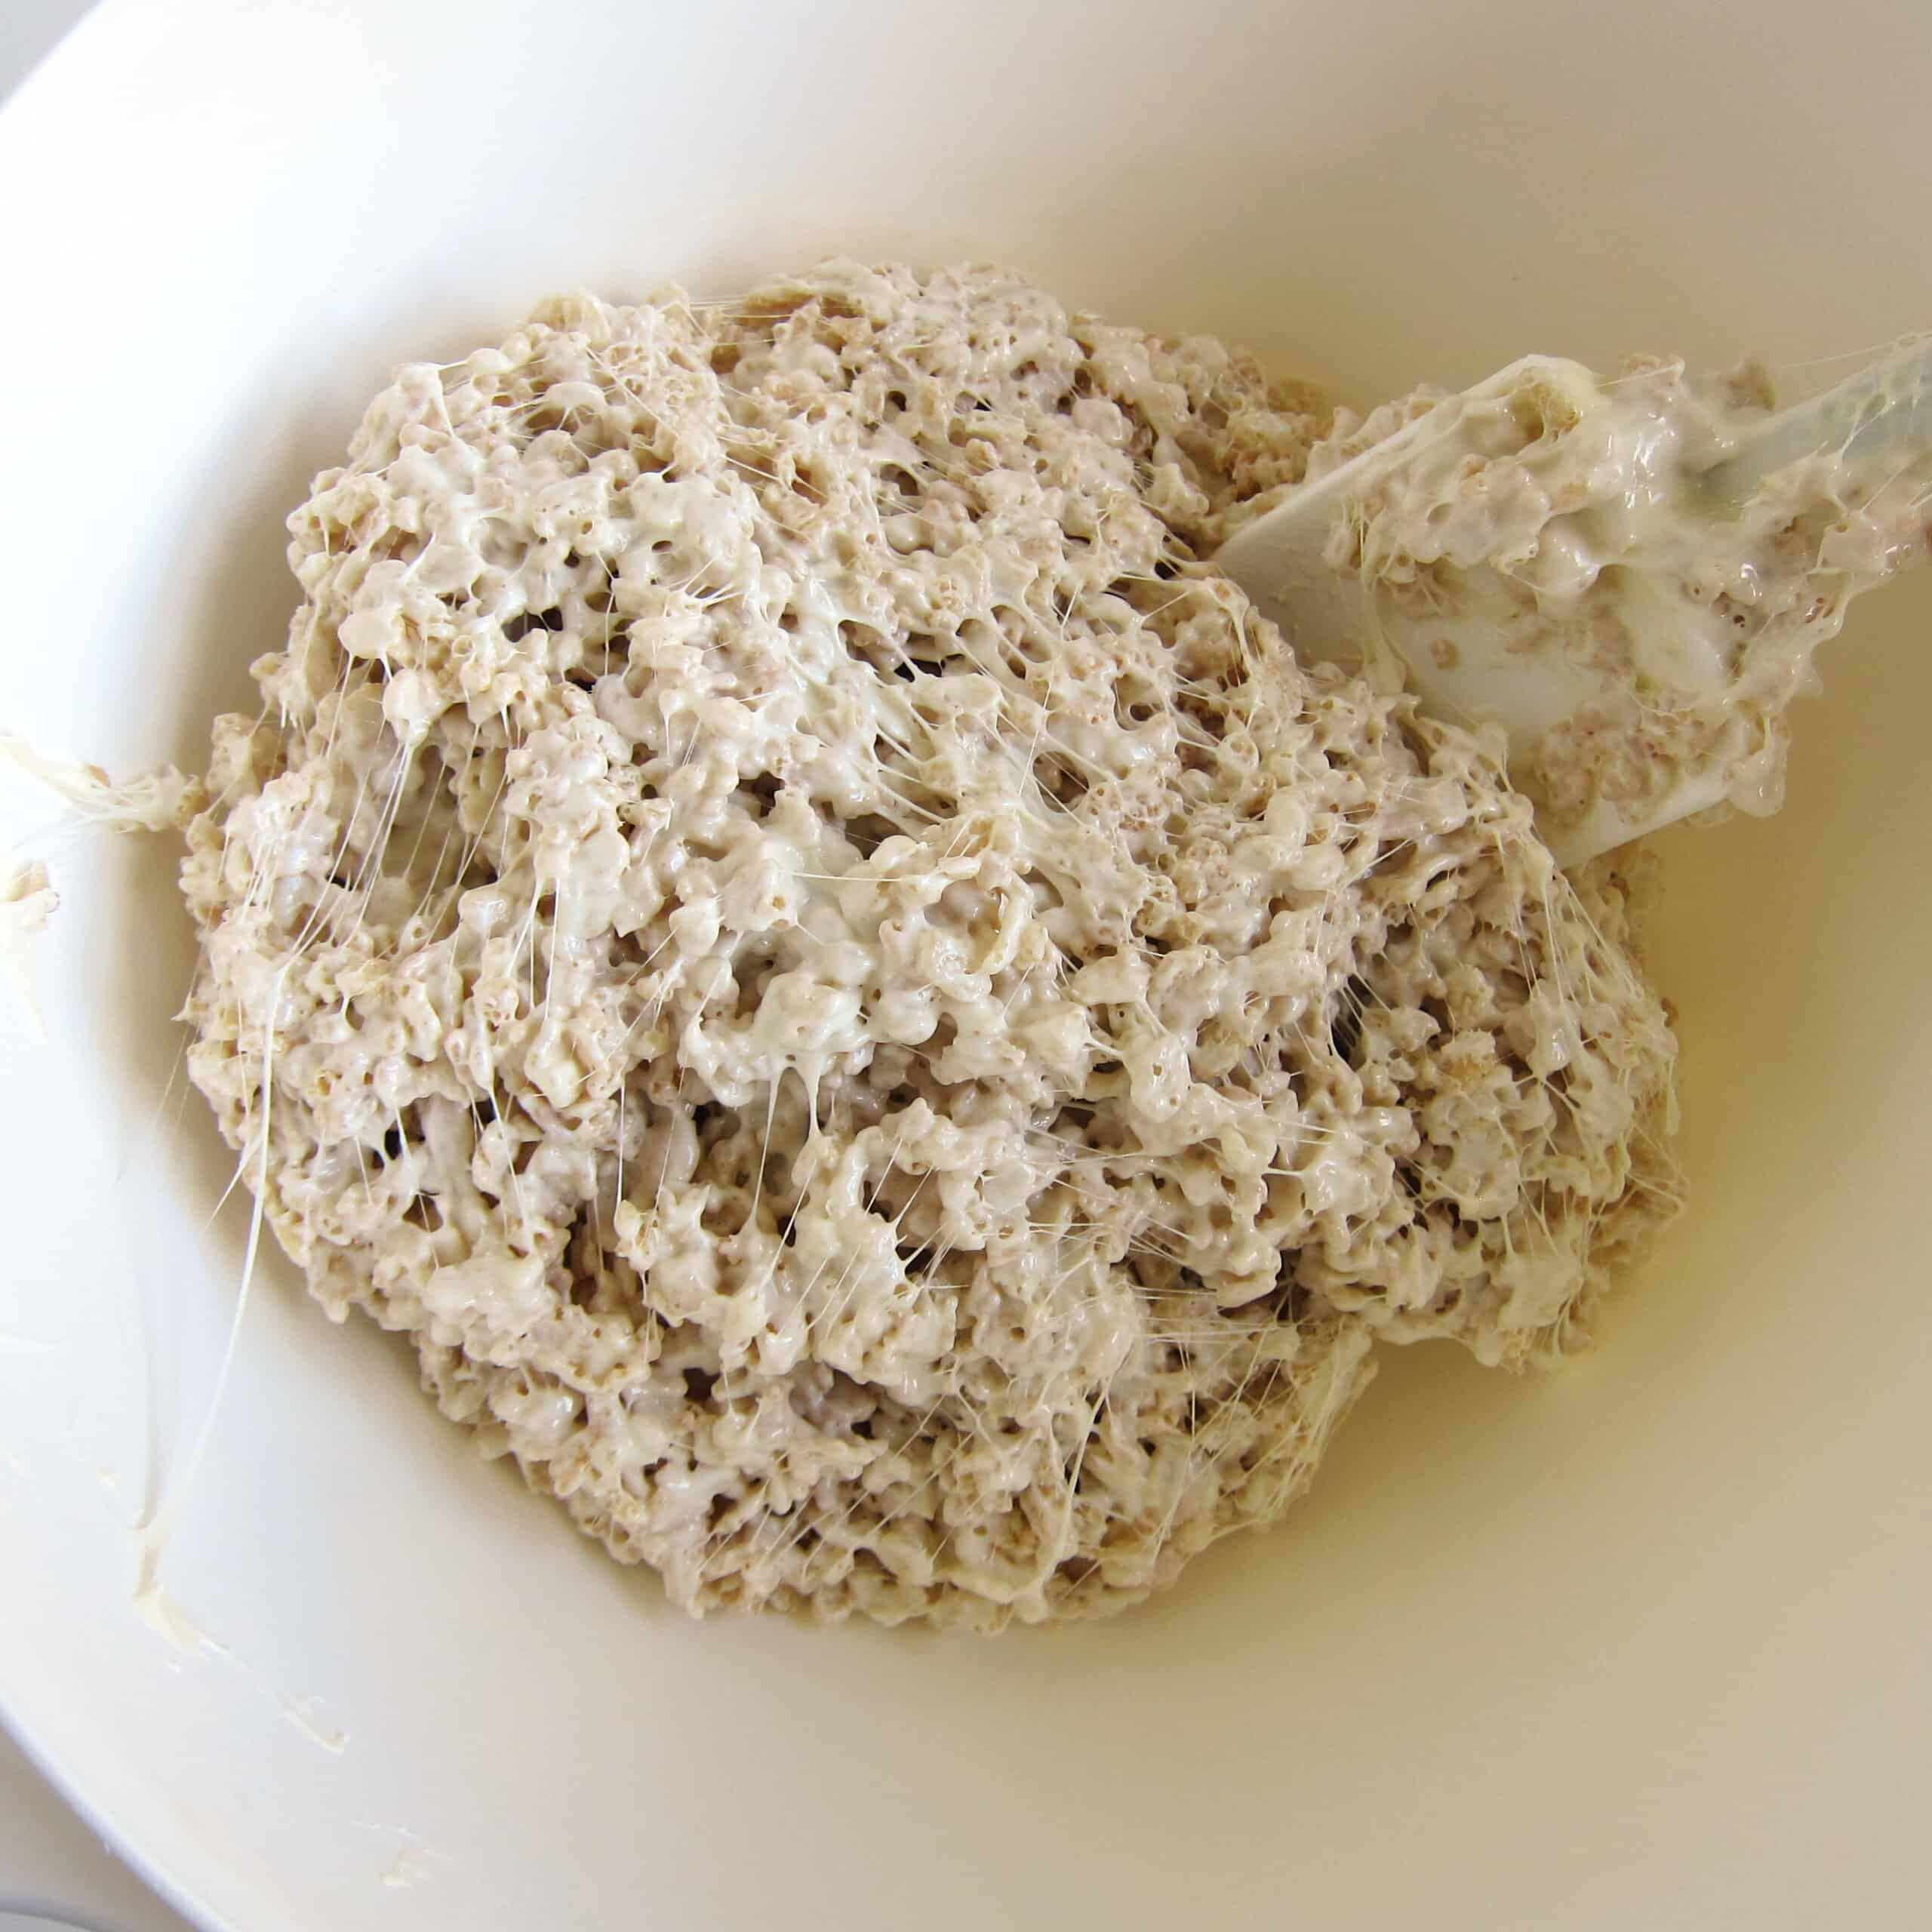 Rice Krispie treat mixture in a white mixing bowl.